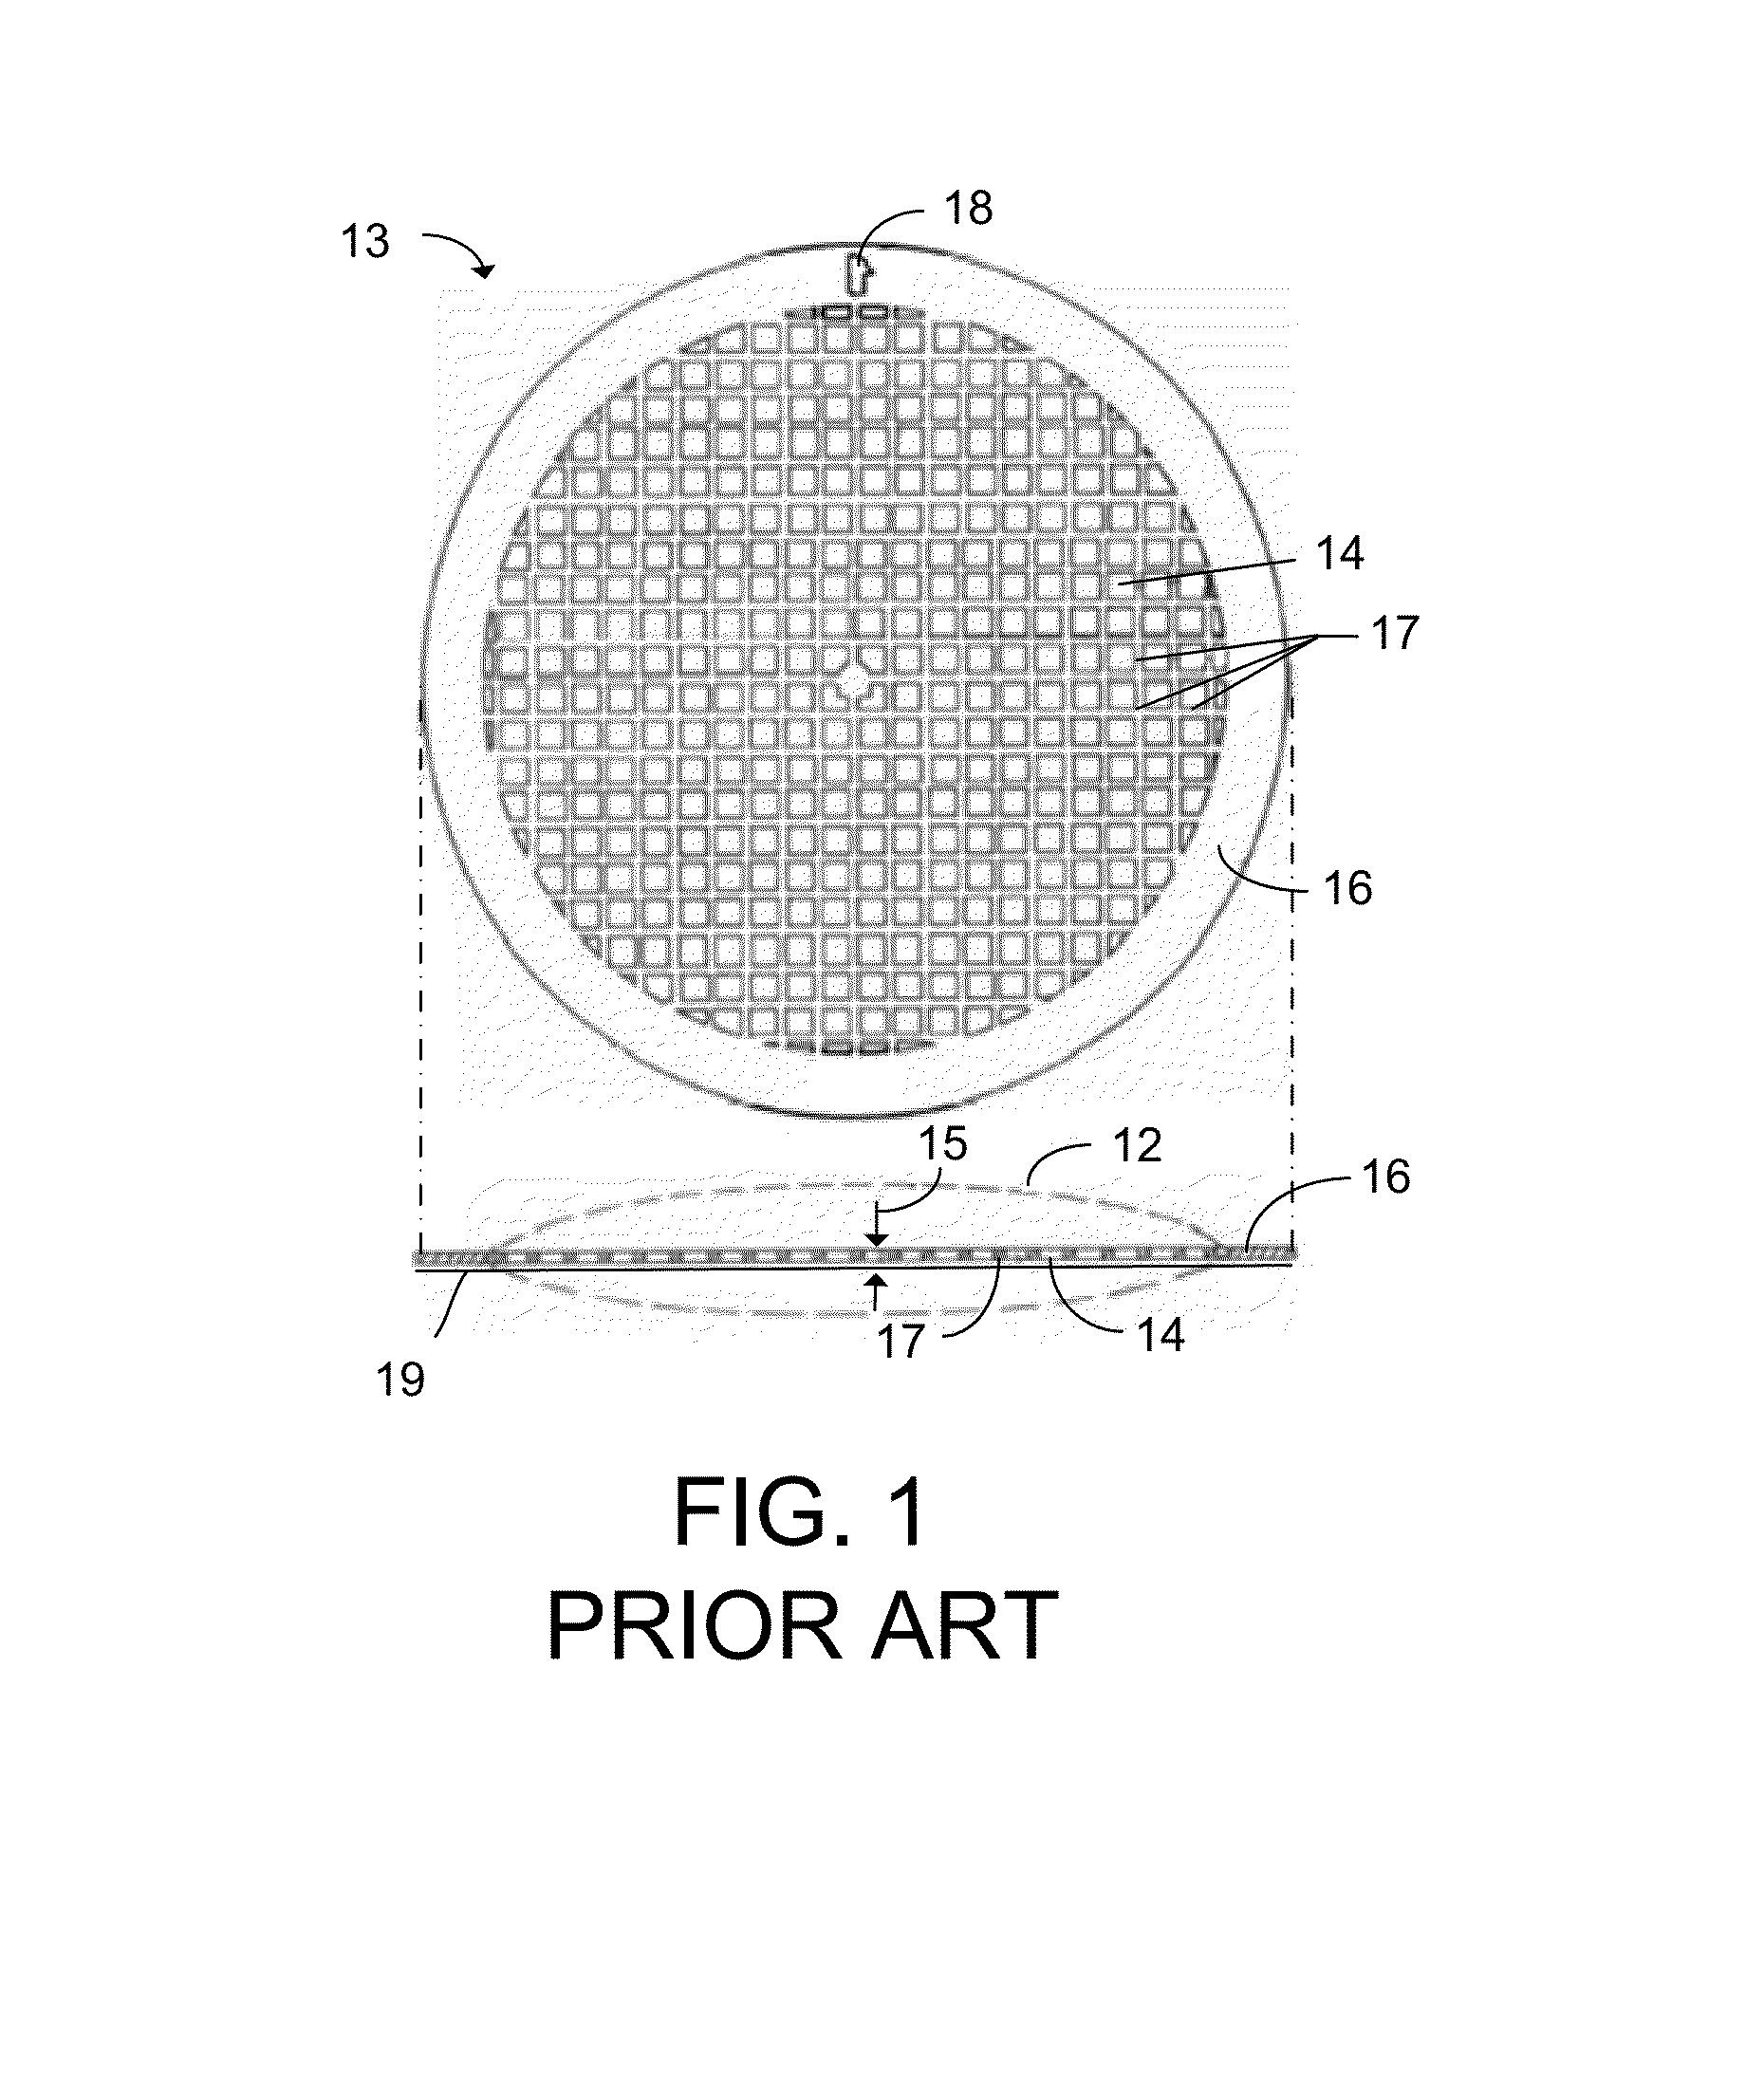 System and Method for Ex Situ Analysis of a Substrate